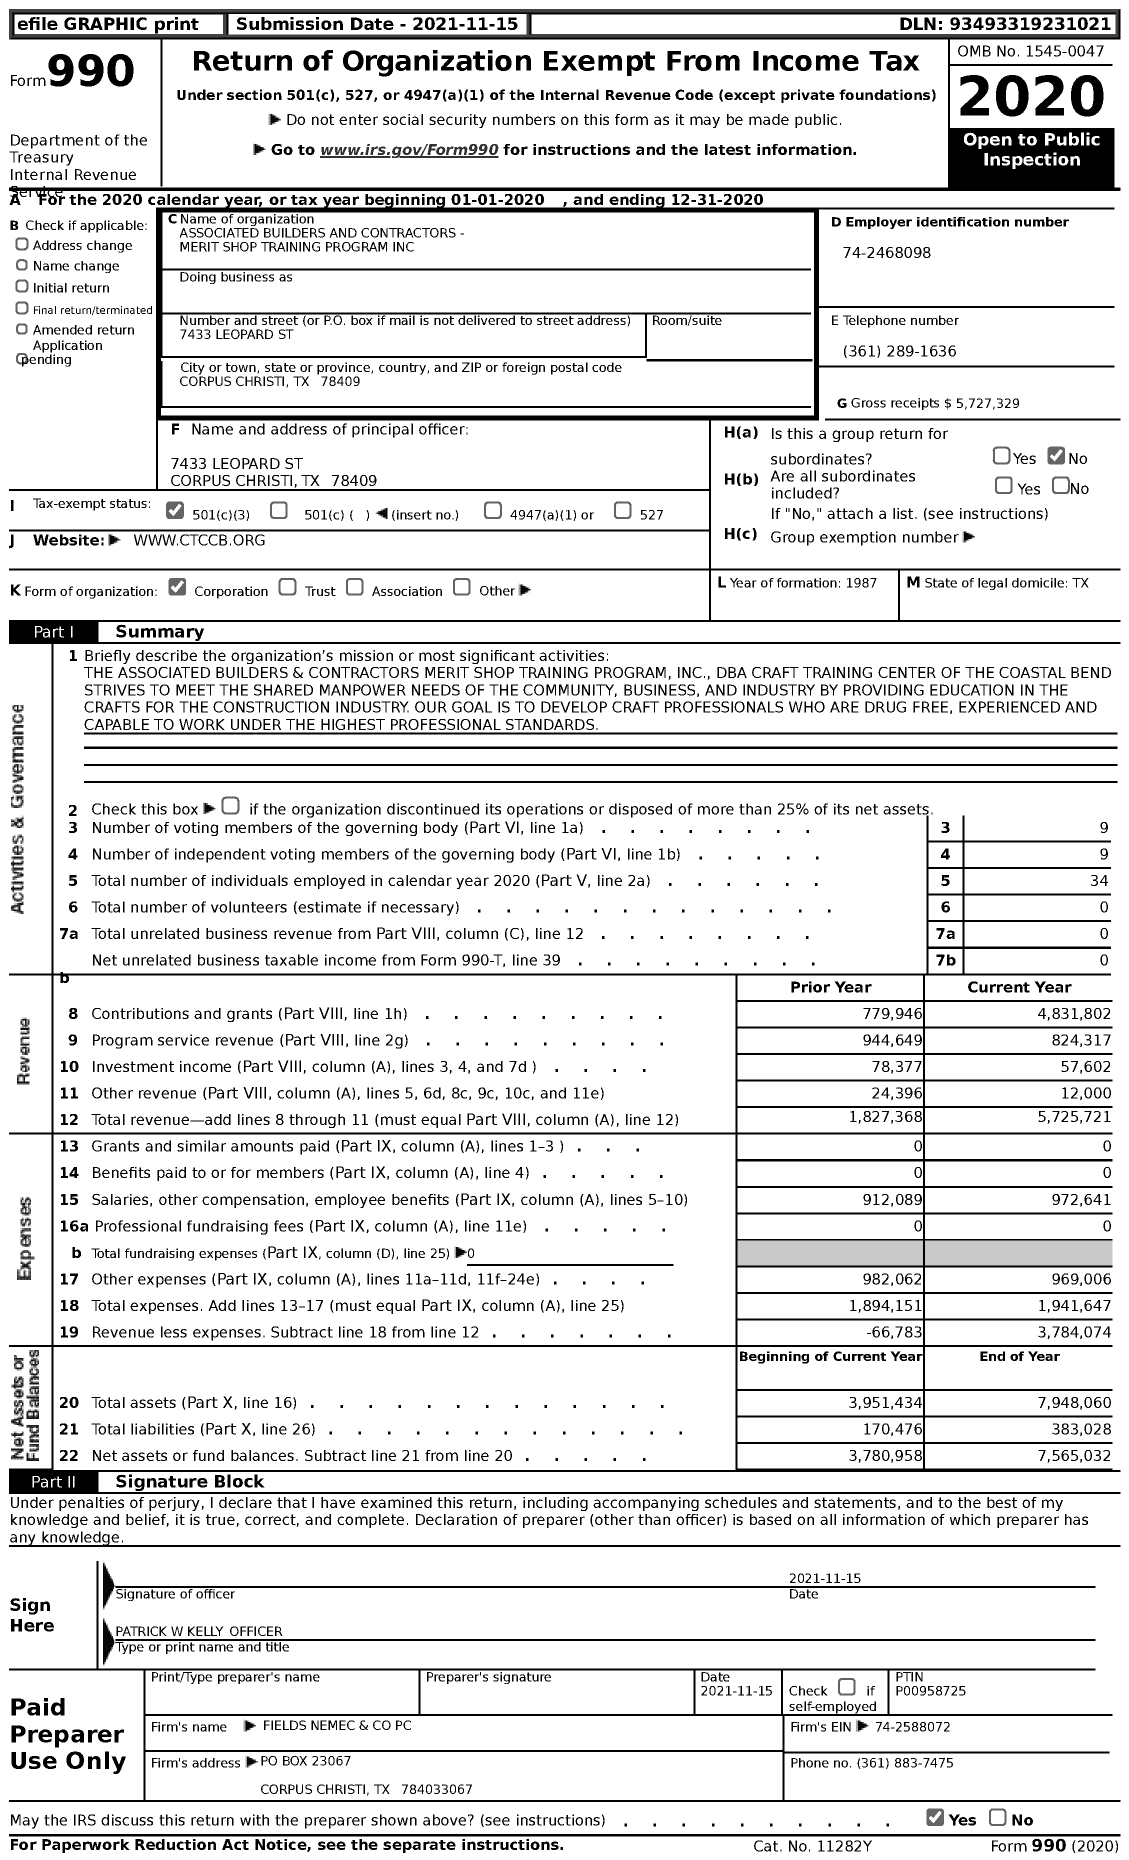 Image of first page of 2020 Form 990 for Craft Training Center of the Coastal Bend